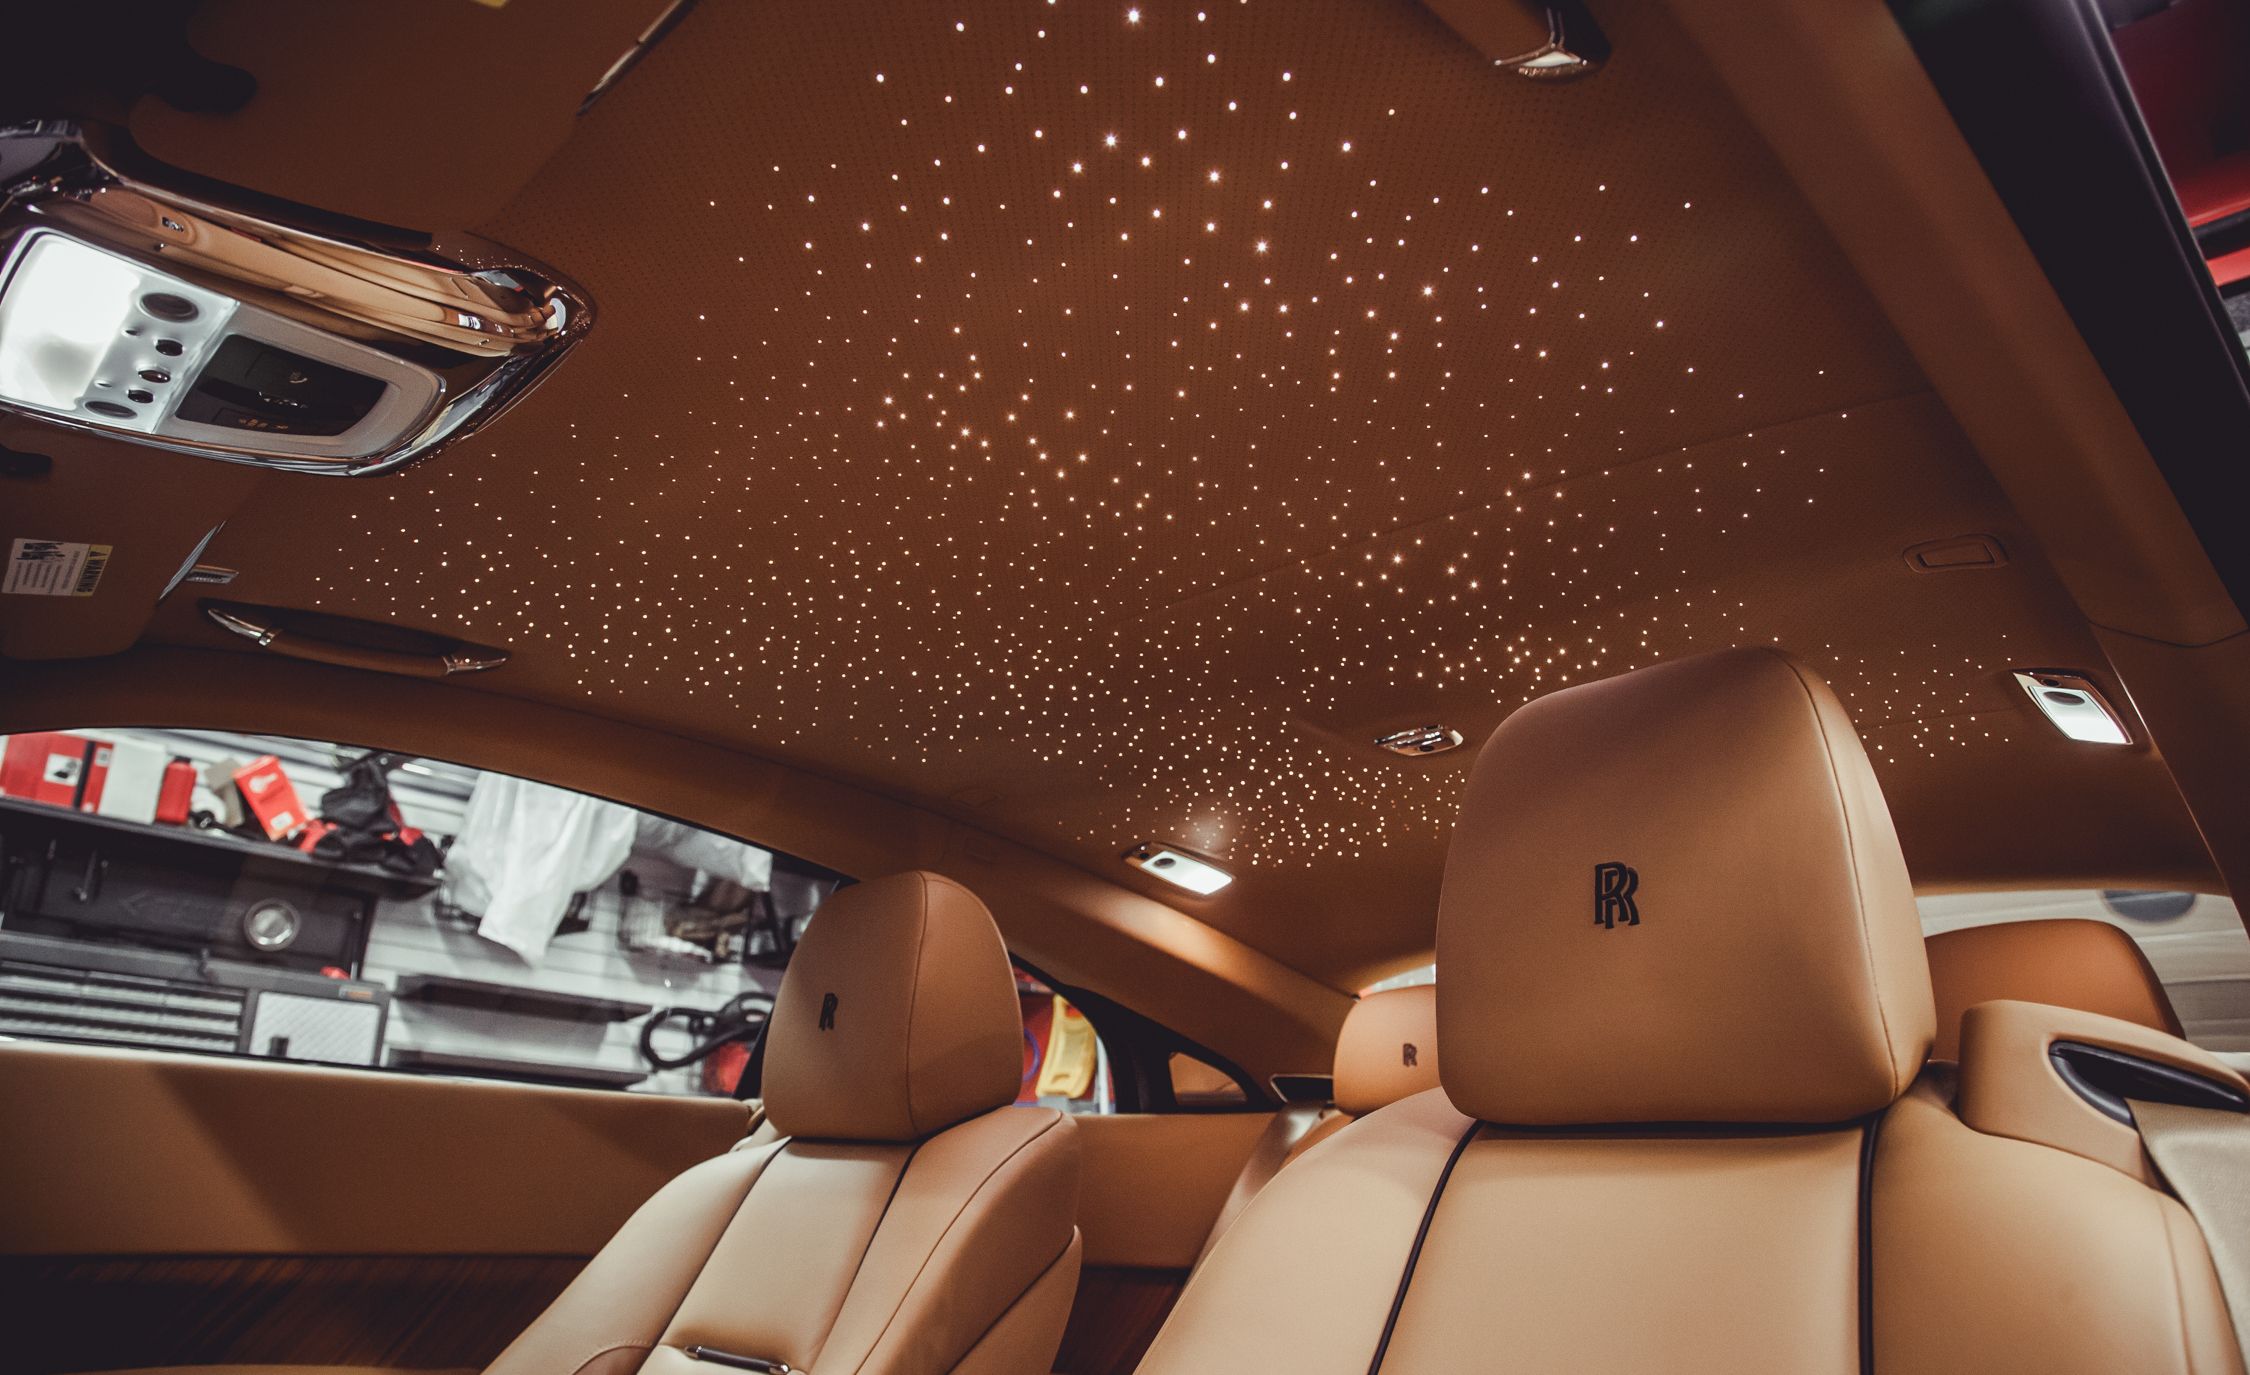 RollsRoyce Motor Cars  The Wraiths Starlight headliner is made of 1340  gleaming fibre optics painstakingly installed by hand As you would expect  from RollsRoyce they can be sewn into the constellation